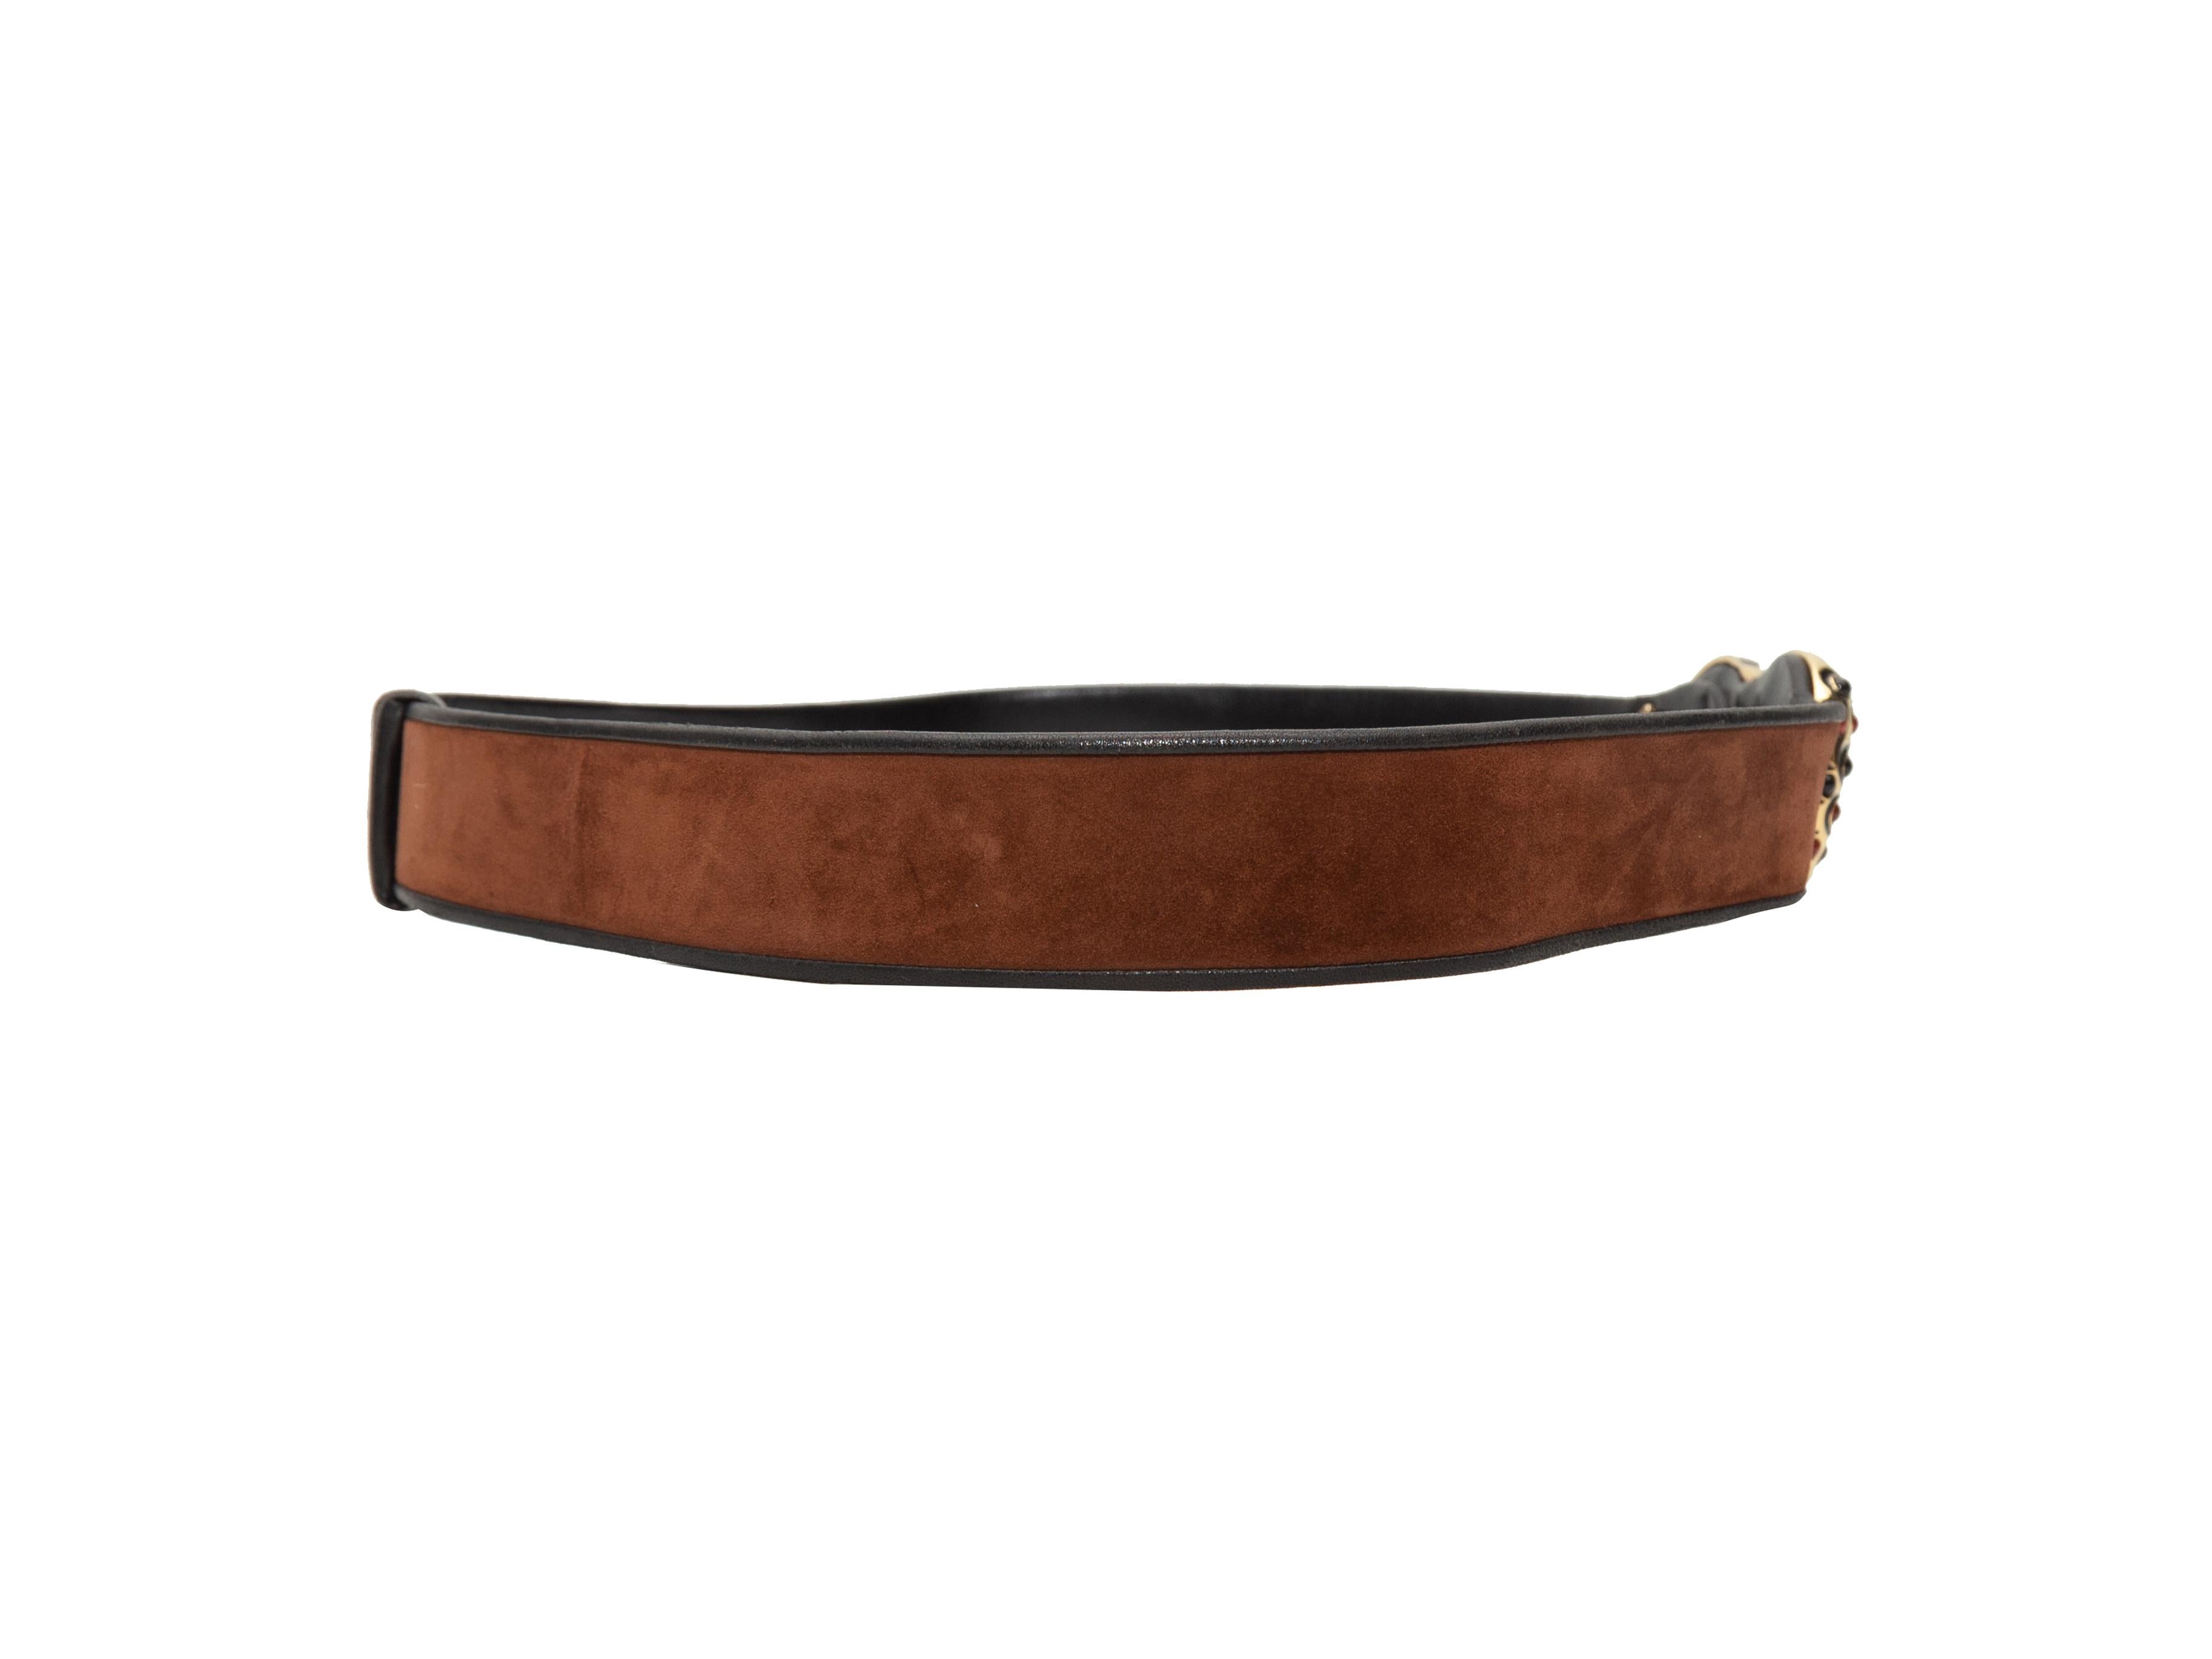 Product details: Brown suede waist belt by Judith Leiber. Black leather trim. Gold-tone zebra and leopard motif buckle closure. 1.5